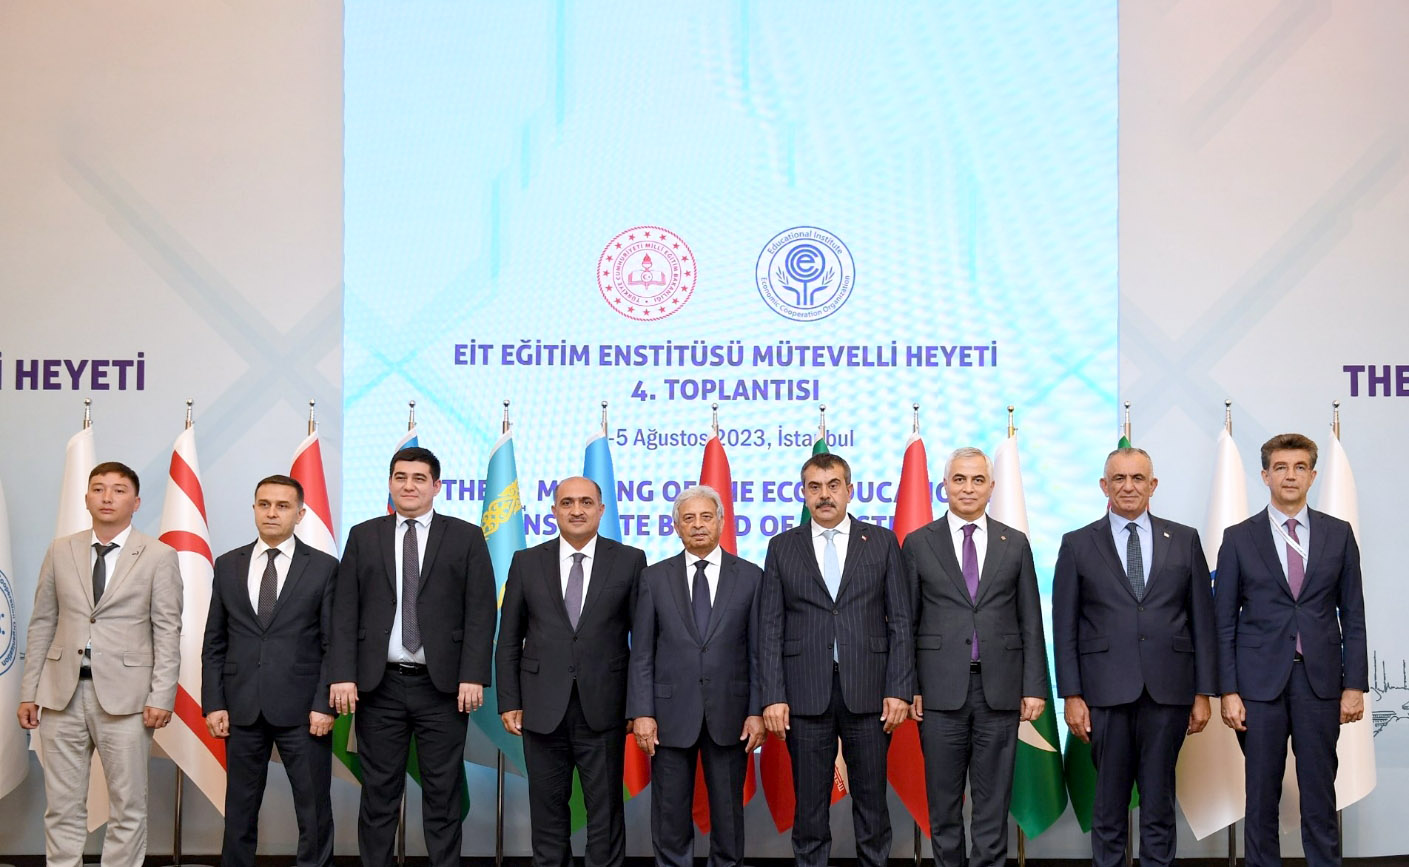 ECI President Participates in Fourth meeting of Board of Trustees of ECO Educational Institute